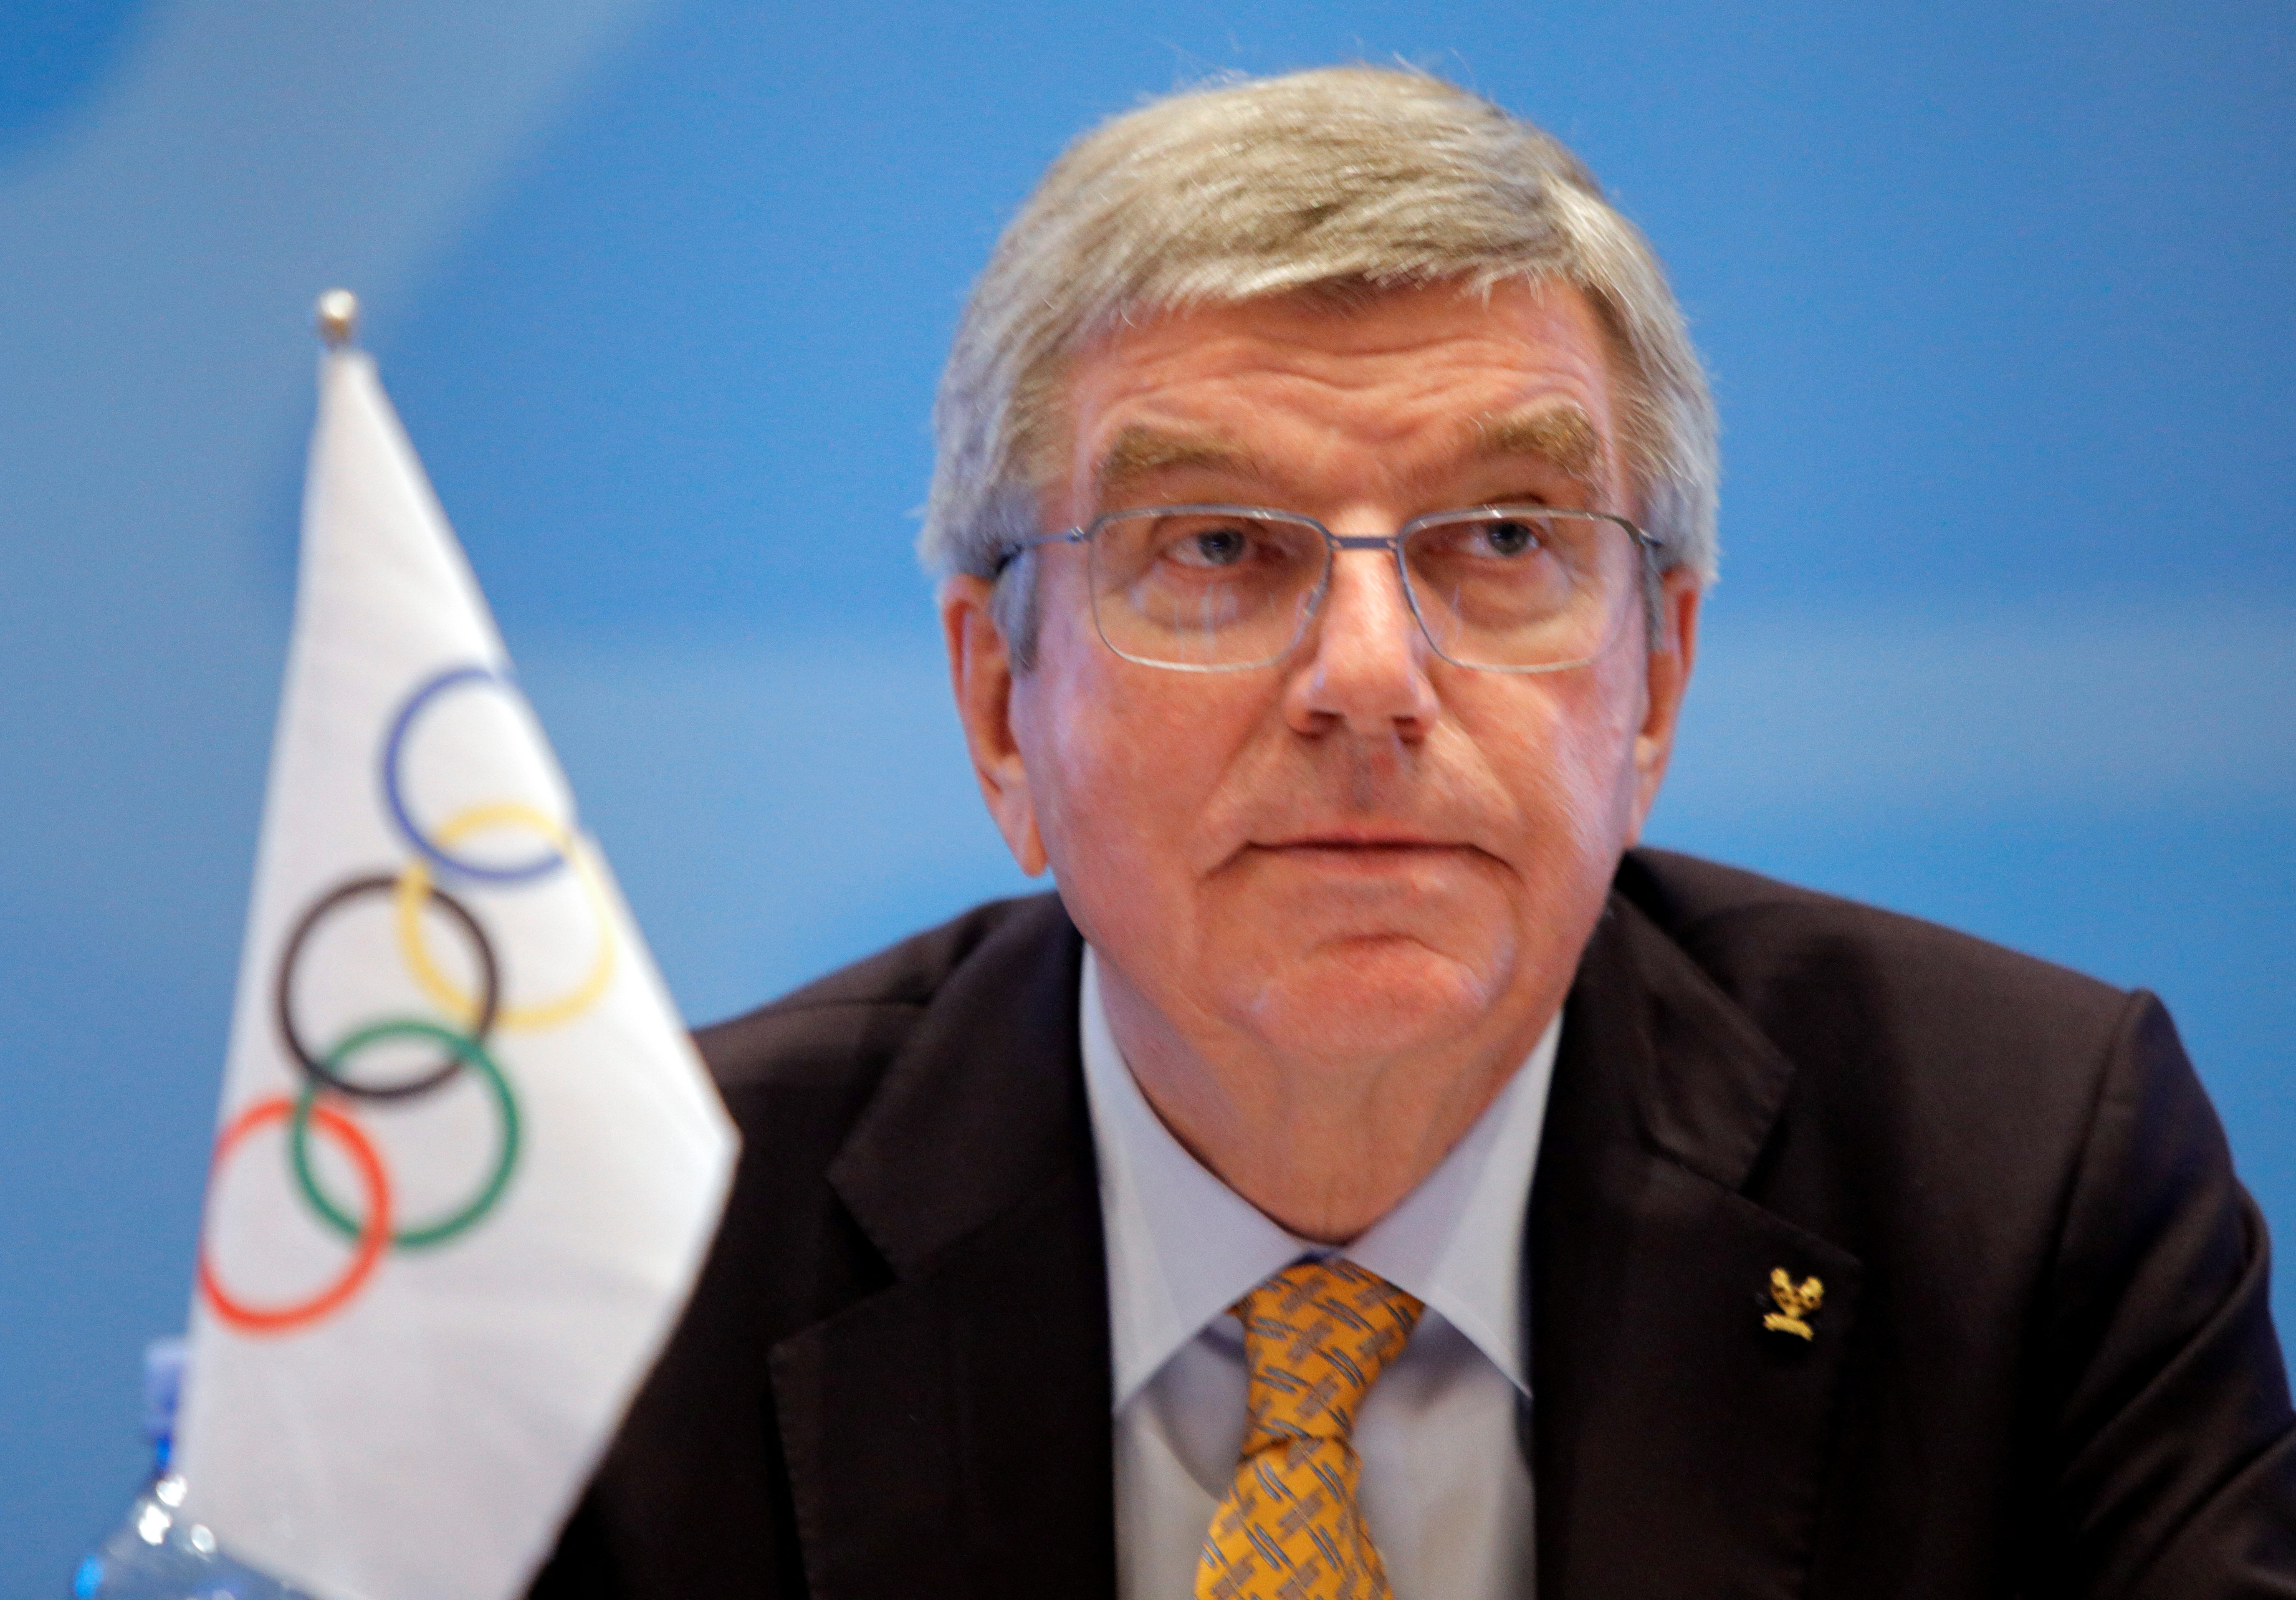 President of the International Olympic Committee Thomas Bach attends the 51st General Assembly in Skopje, North Macedonia, June 10, 2022. REUTERS/Ognen Teofilovski